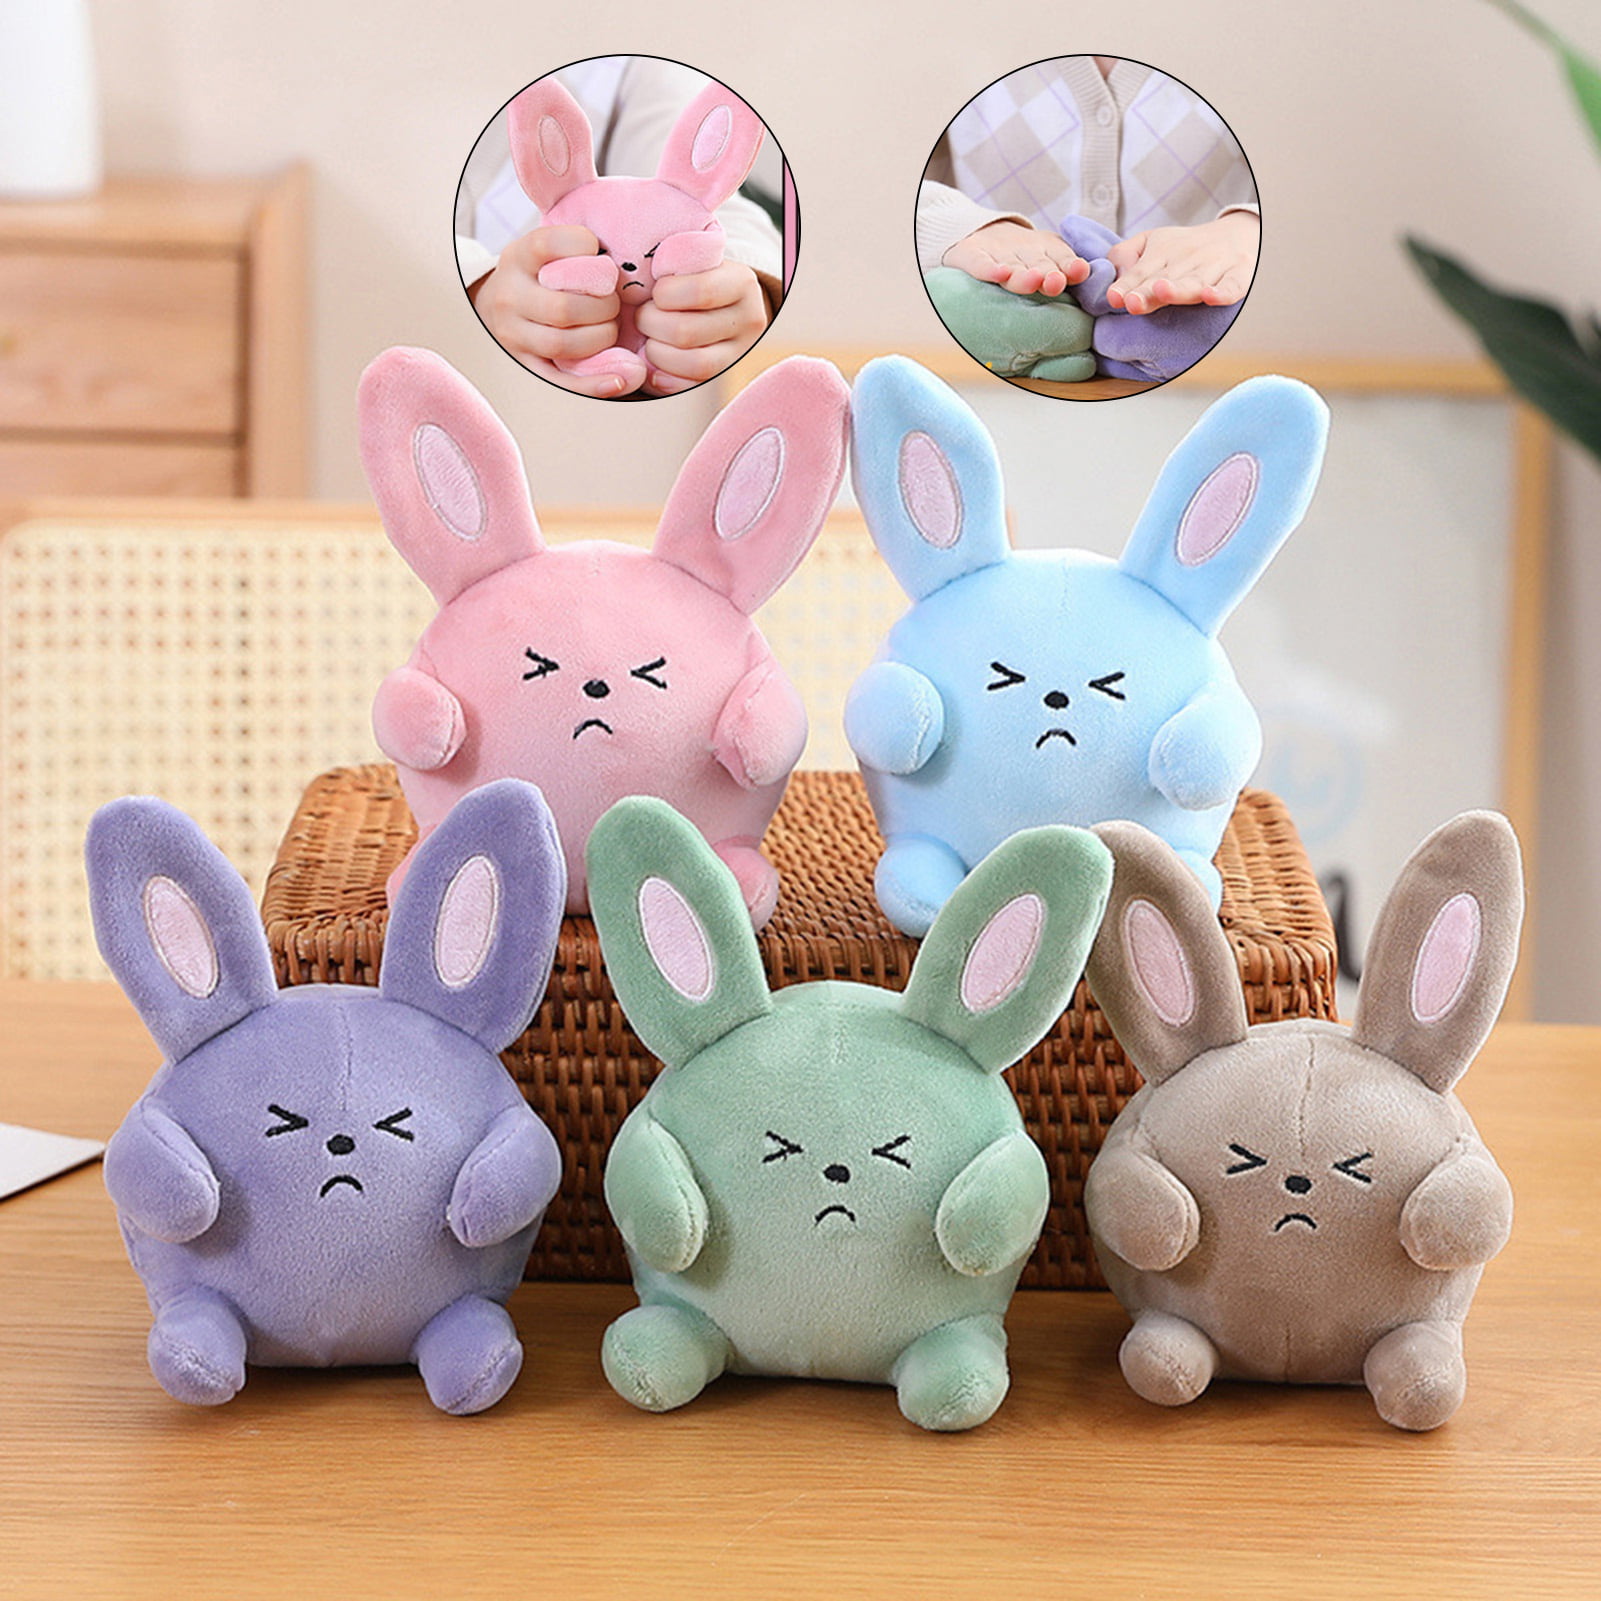 Adorable Kawaii Cartoon Bunny Bunzo Bunny Plush  Soft Stuffed Fat  Rabbit Toy For Sleeping, Weddings, And Decor Available In 70cm And 100cm  Sizes DY50274 From Dorimytrader, $45.89